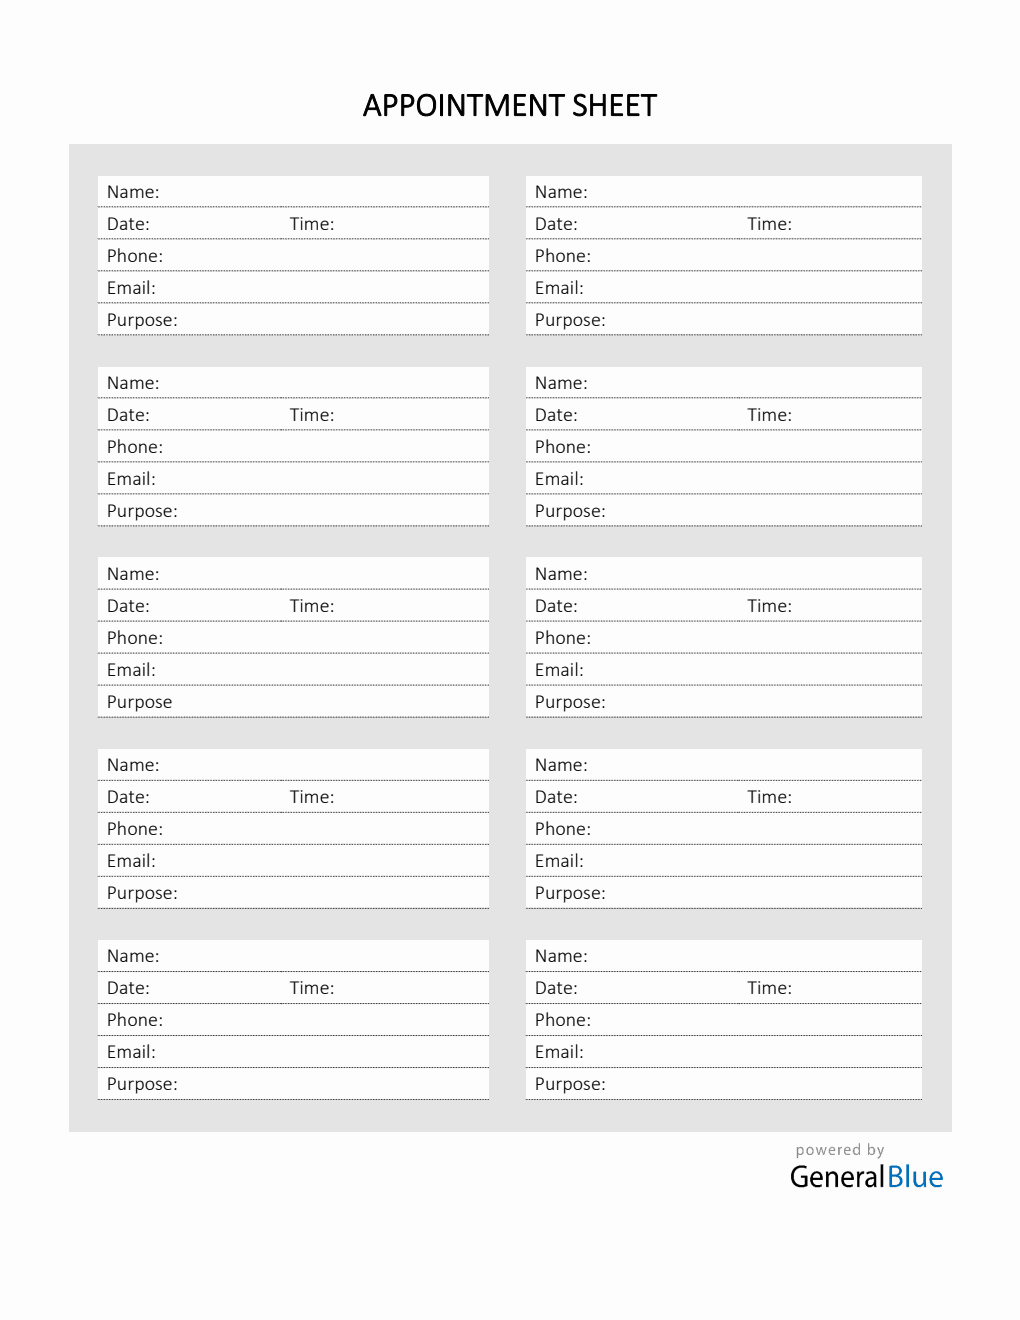 Appointment Sheet Template in PDF